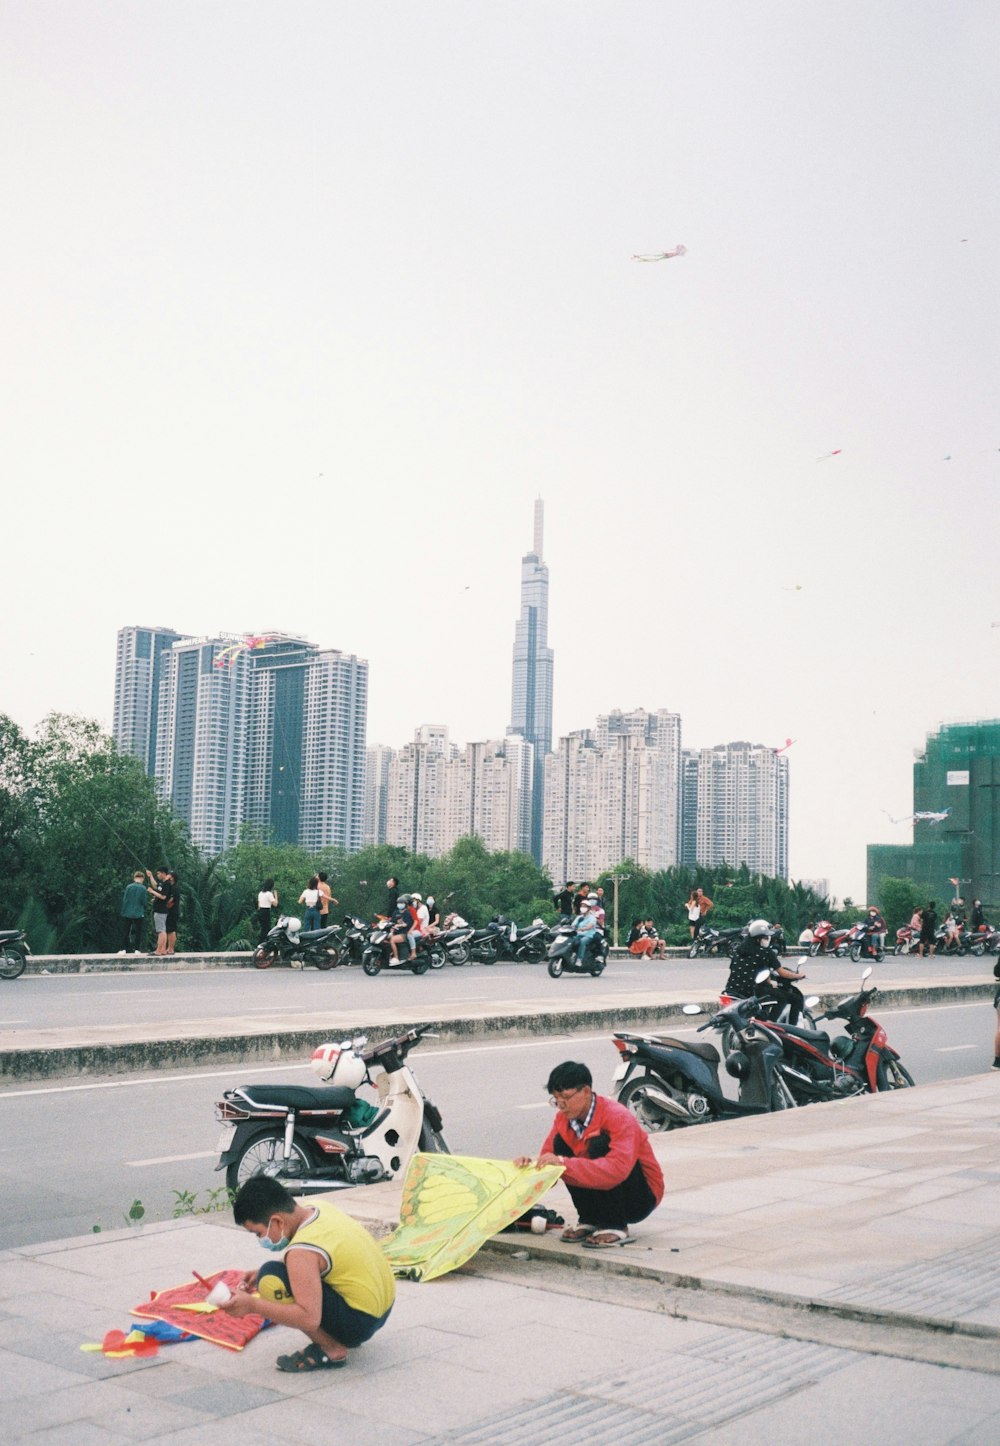 people riding motorcycle on road near city buildings during daytime